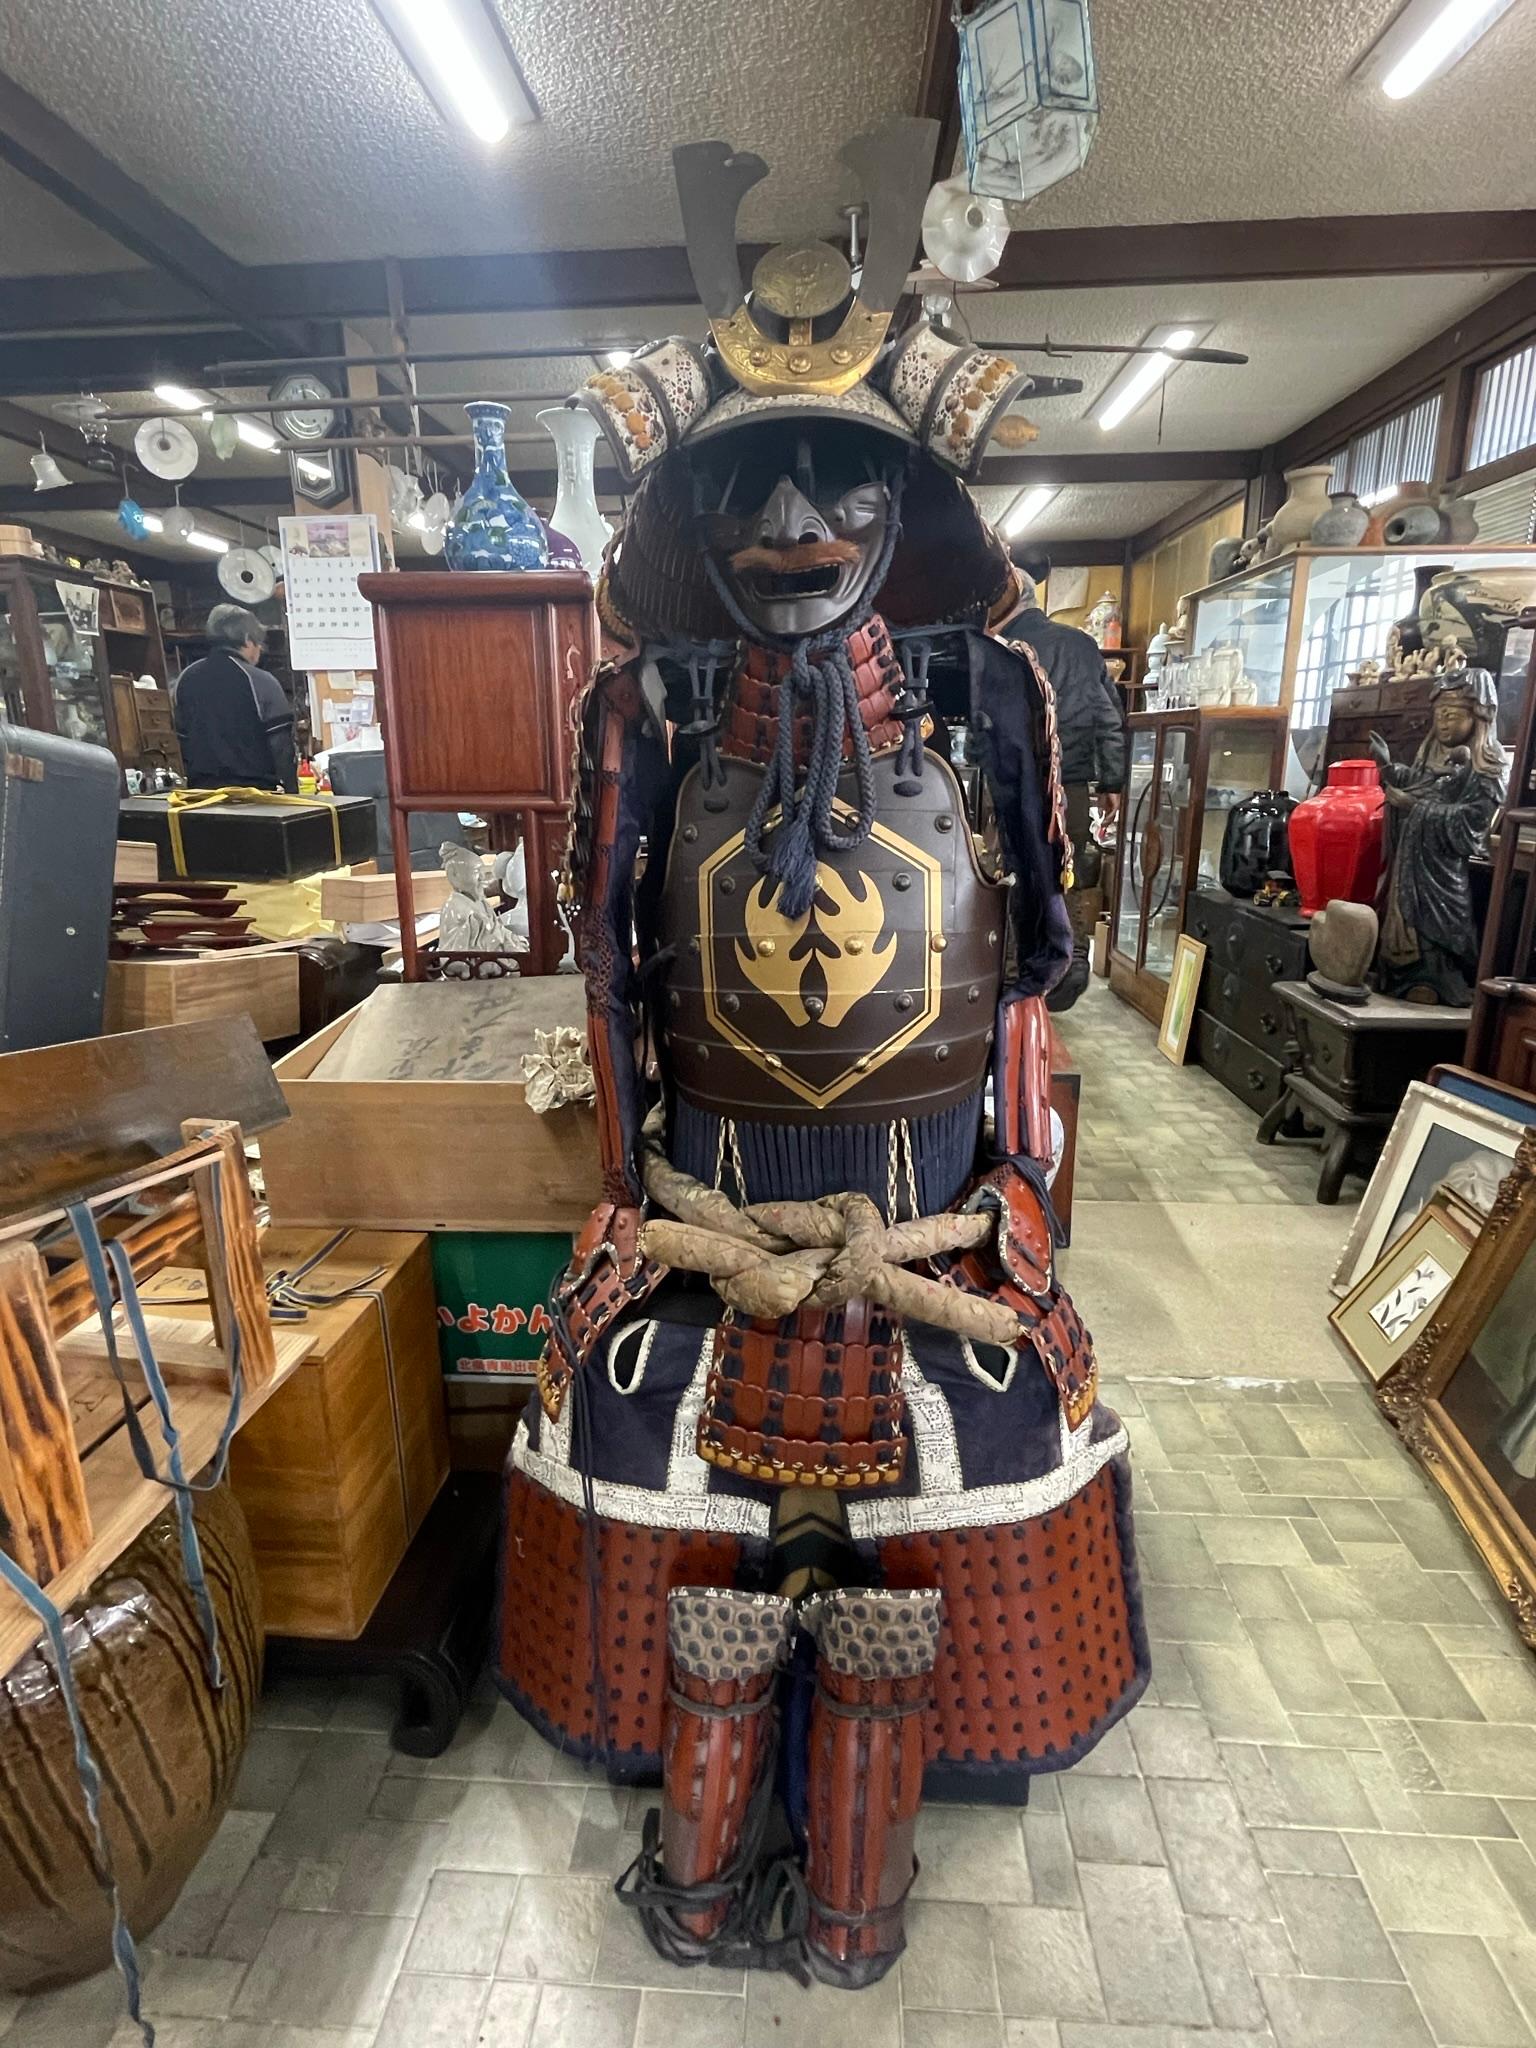 Here's a beautiful and unique way to accent your indoor gallery with this fine treasure from Japan.

Yoroi Samurai adult armor hand made in Japan complete with all parts with all authentic materials : lacquered forged iron, dear skin silk and linen.